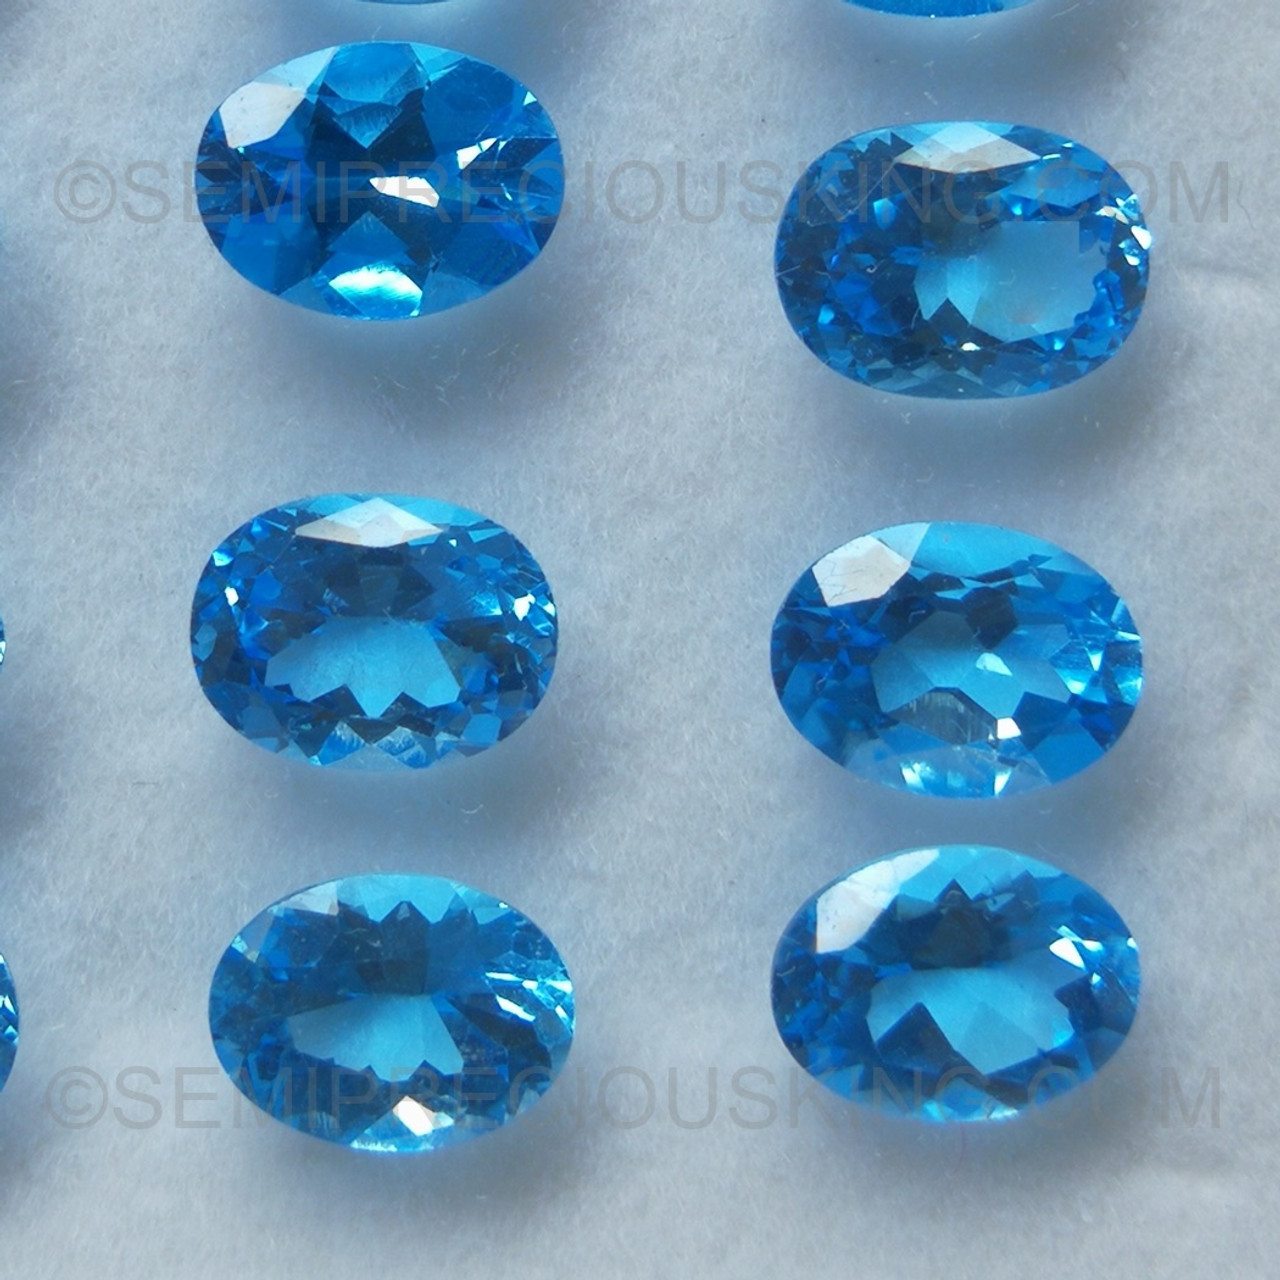 Details about   Lovely Lot of Natural Sky Blue Topaz 8x12 mm Oval Faceted Cut Loose Gemstone 